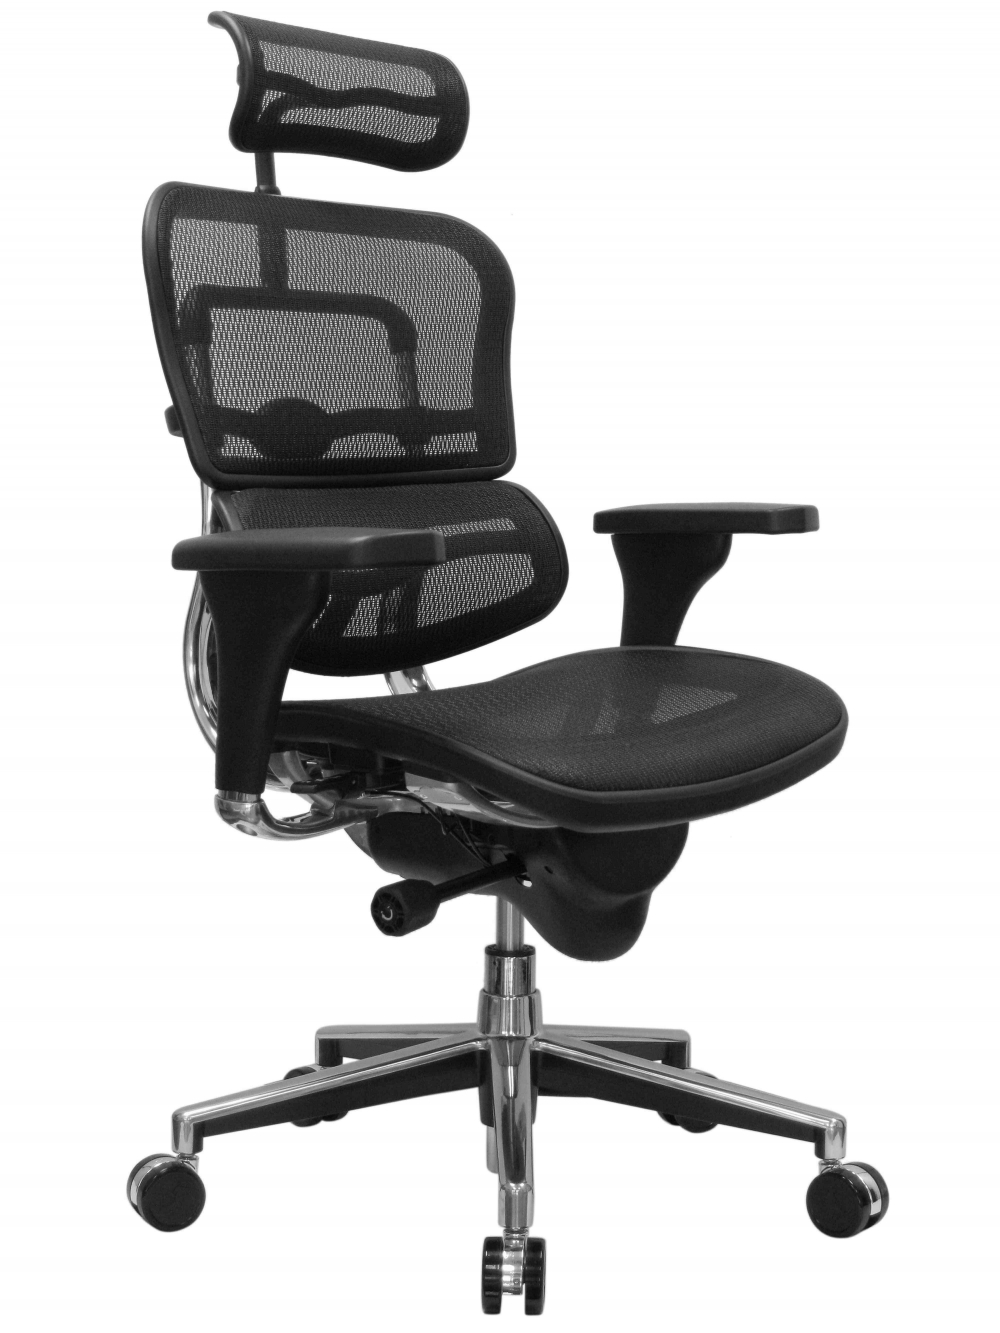 office-furniture-chairs-tall-office-chairs.jpg